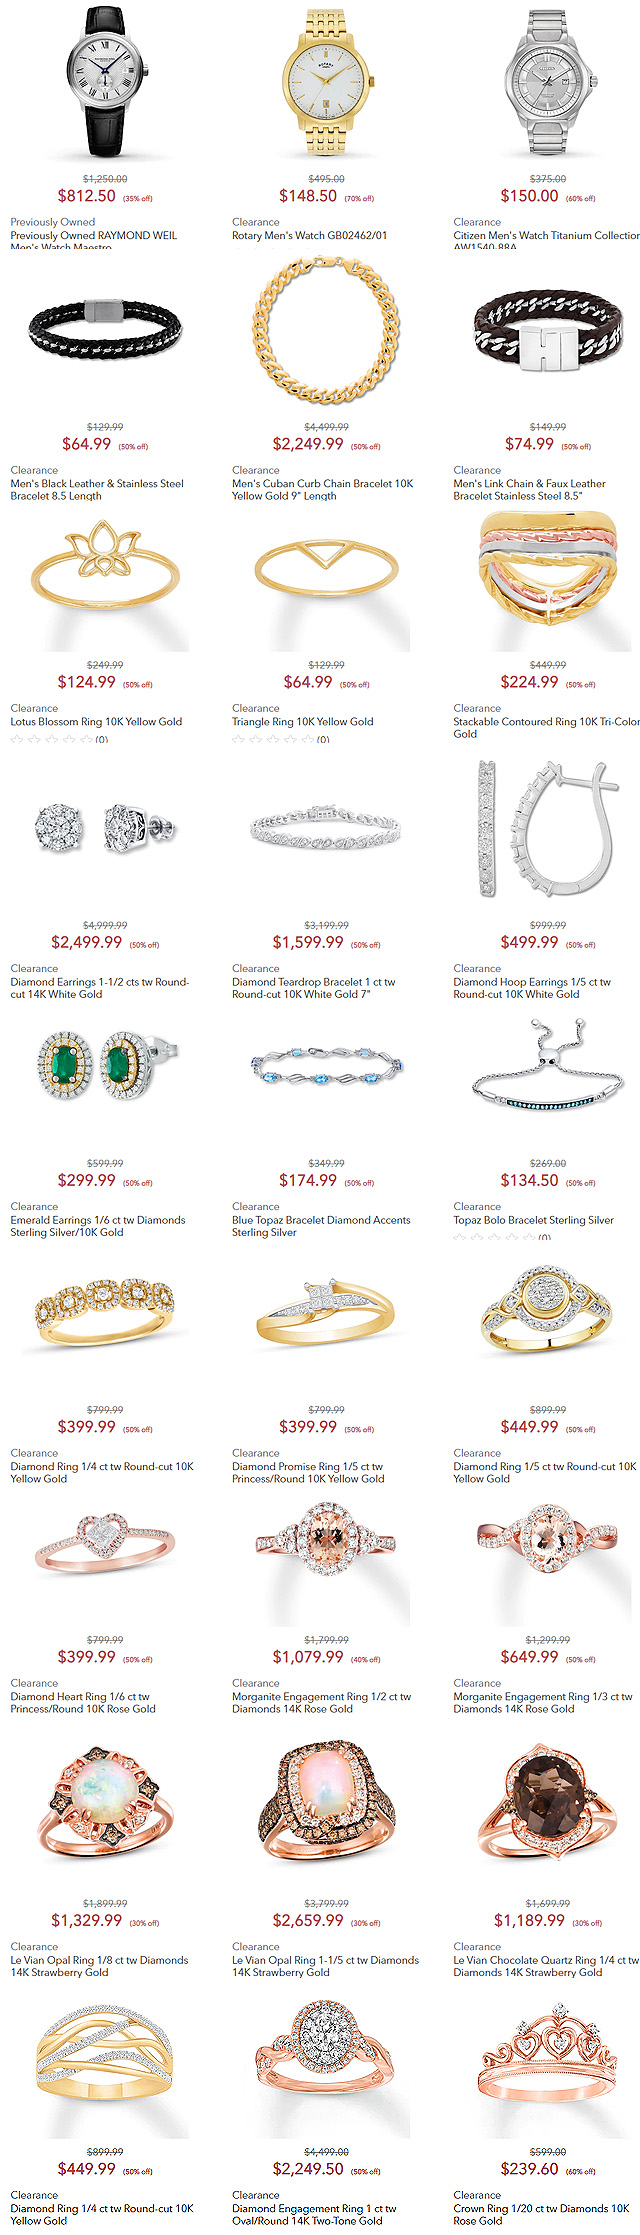 Sale > clearance jewelry > in stock